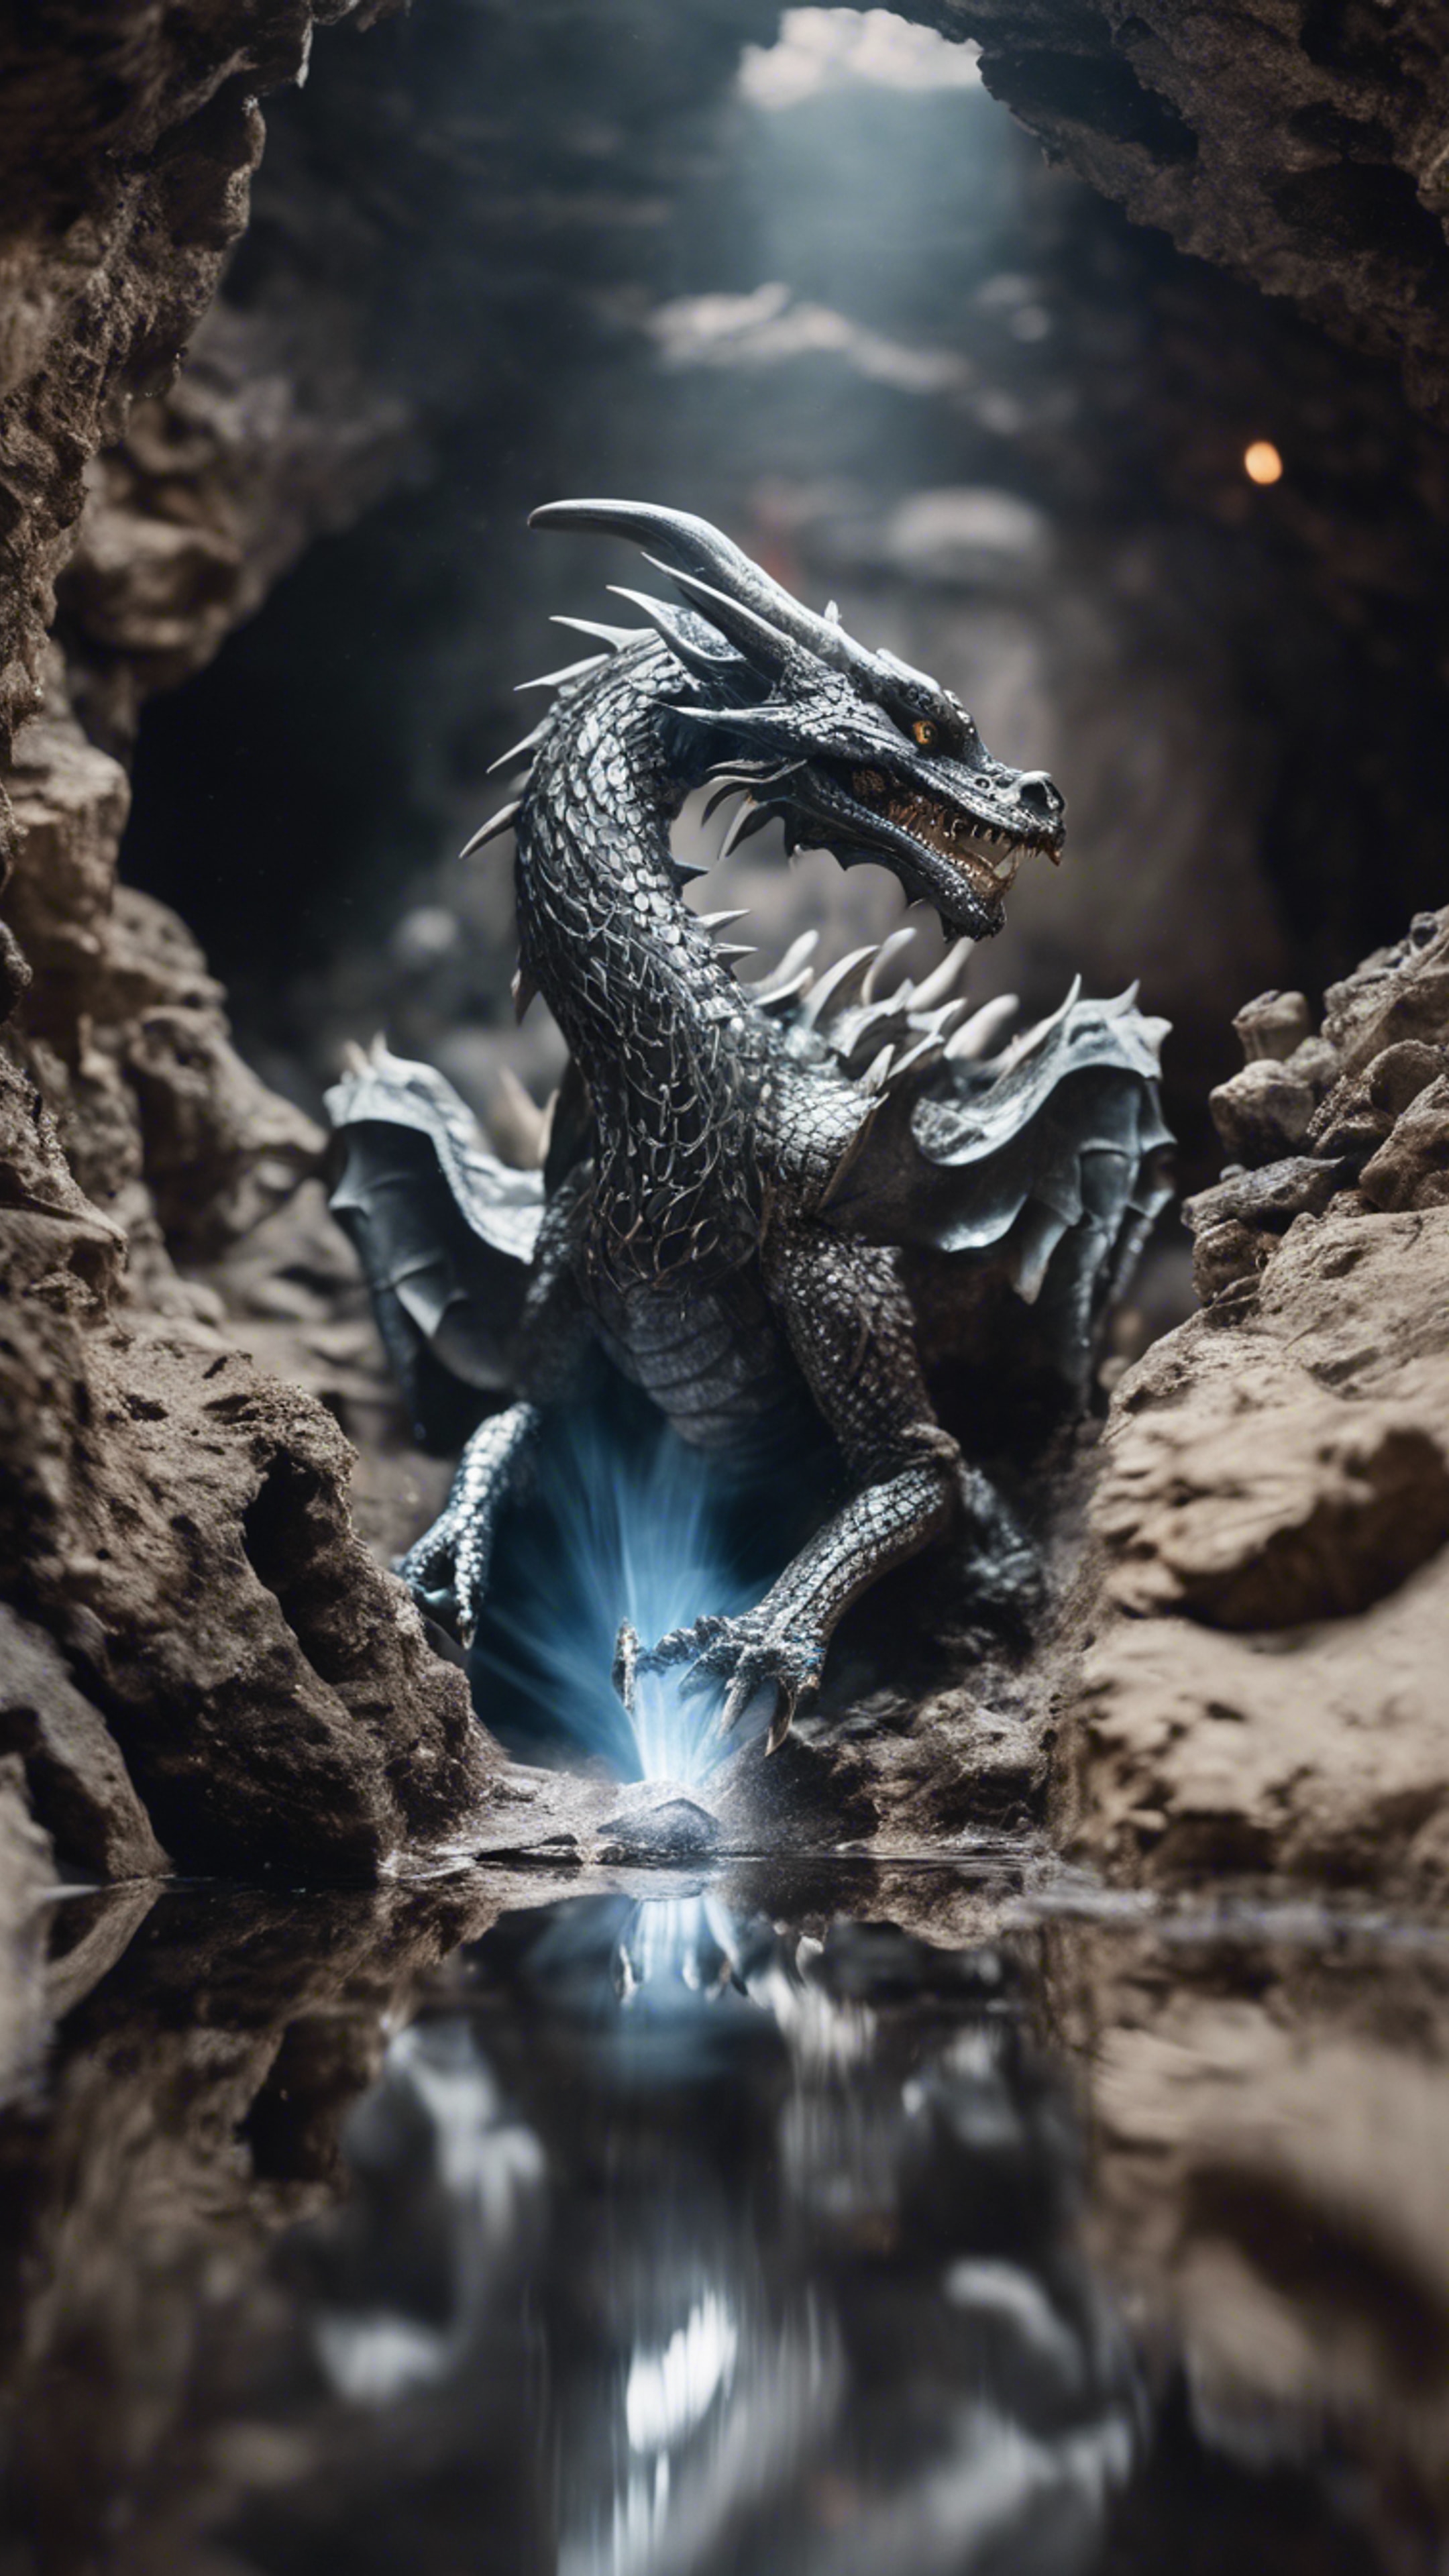 A cool dragon of pure quicksilver, fluid and reflective, darting through a forgotten mine shaft. Tapeta na zeď[4f182db5f22341209a39]